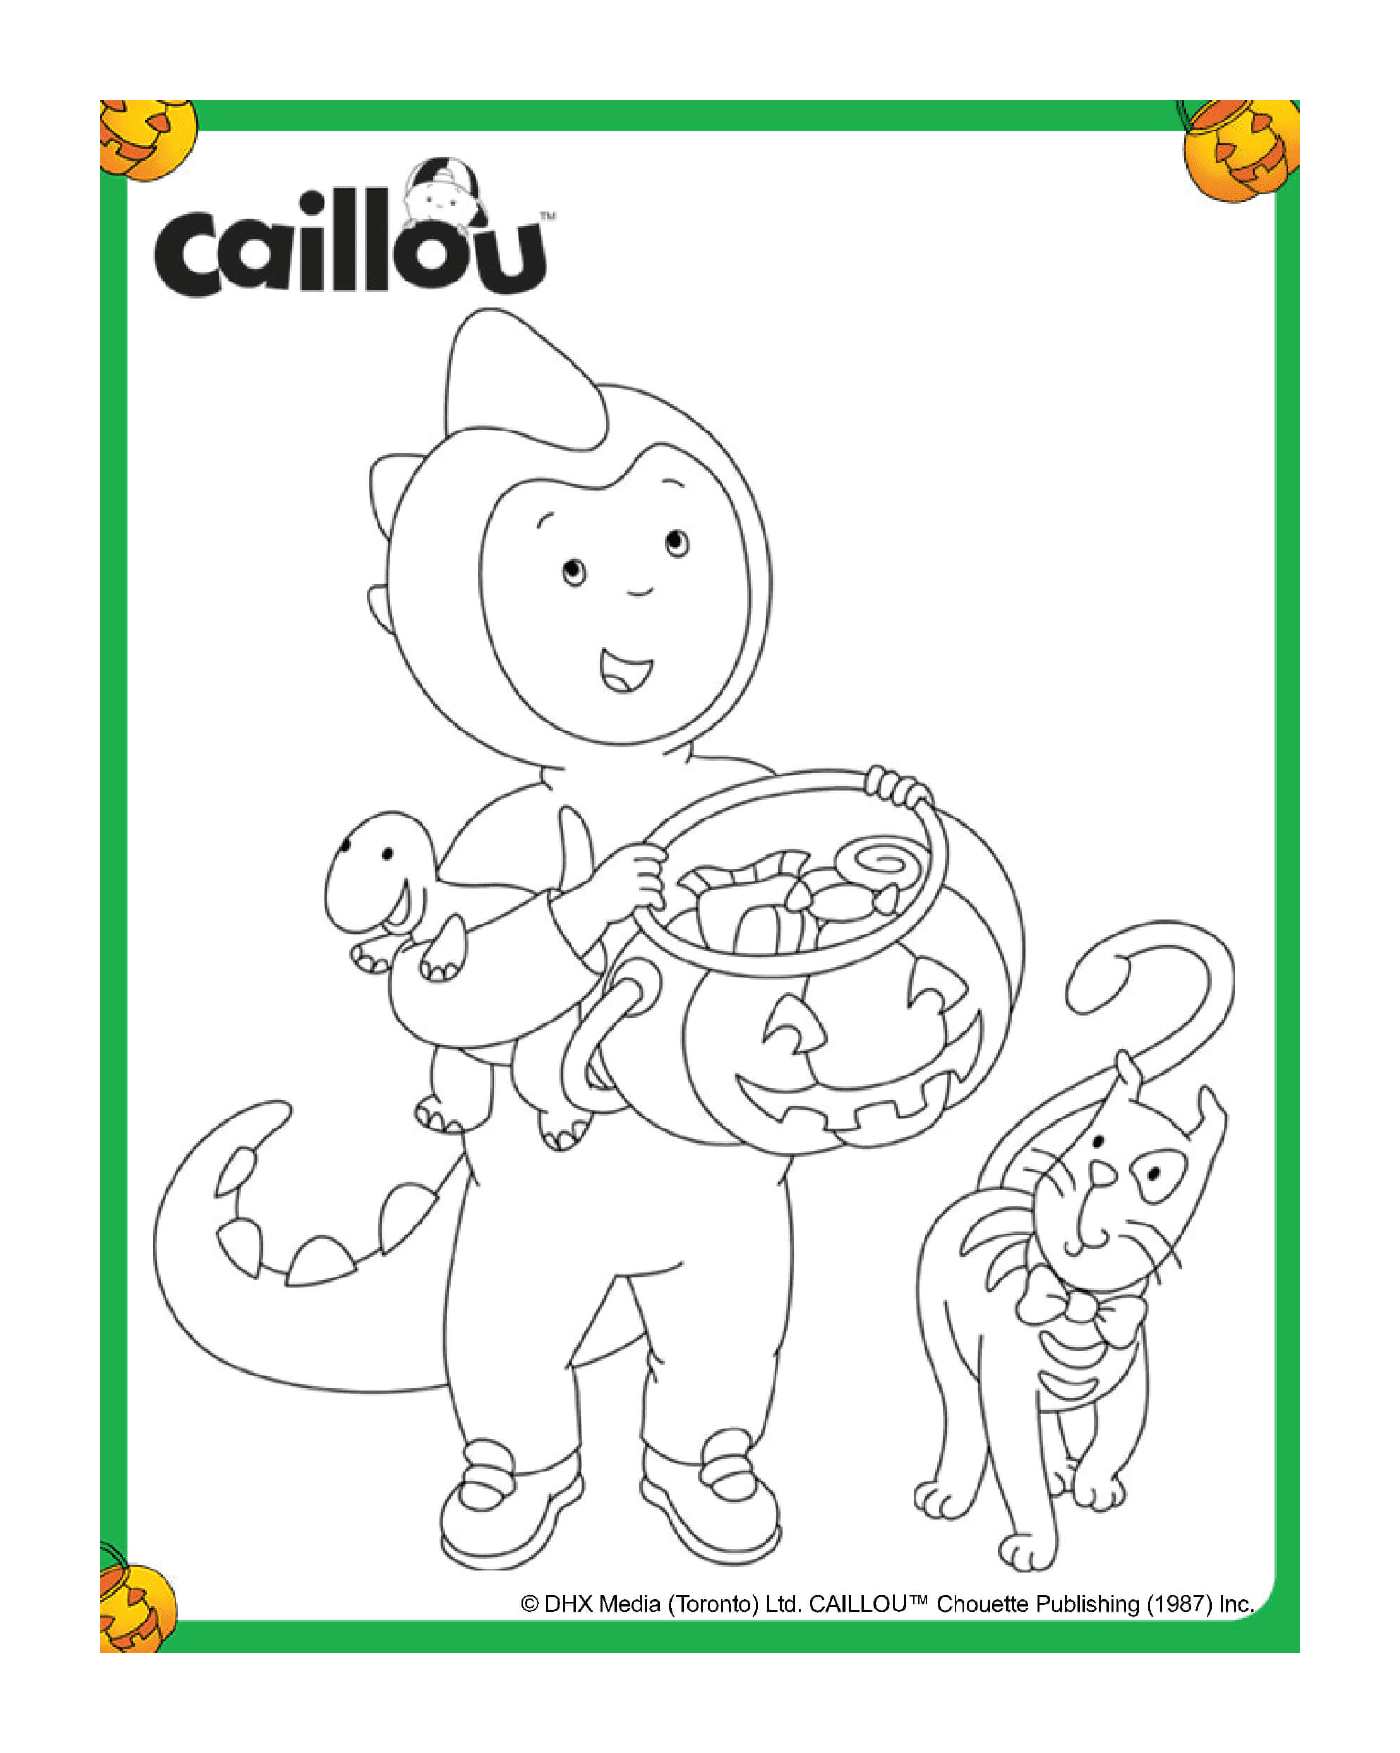  Caillou disguised as a dinosaur for Halloween 